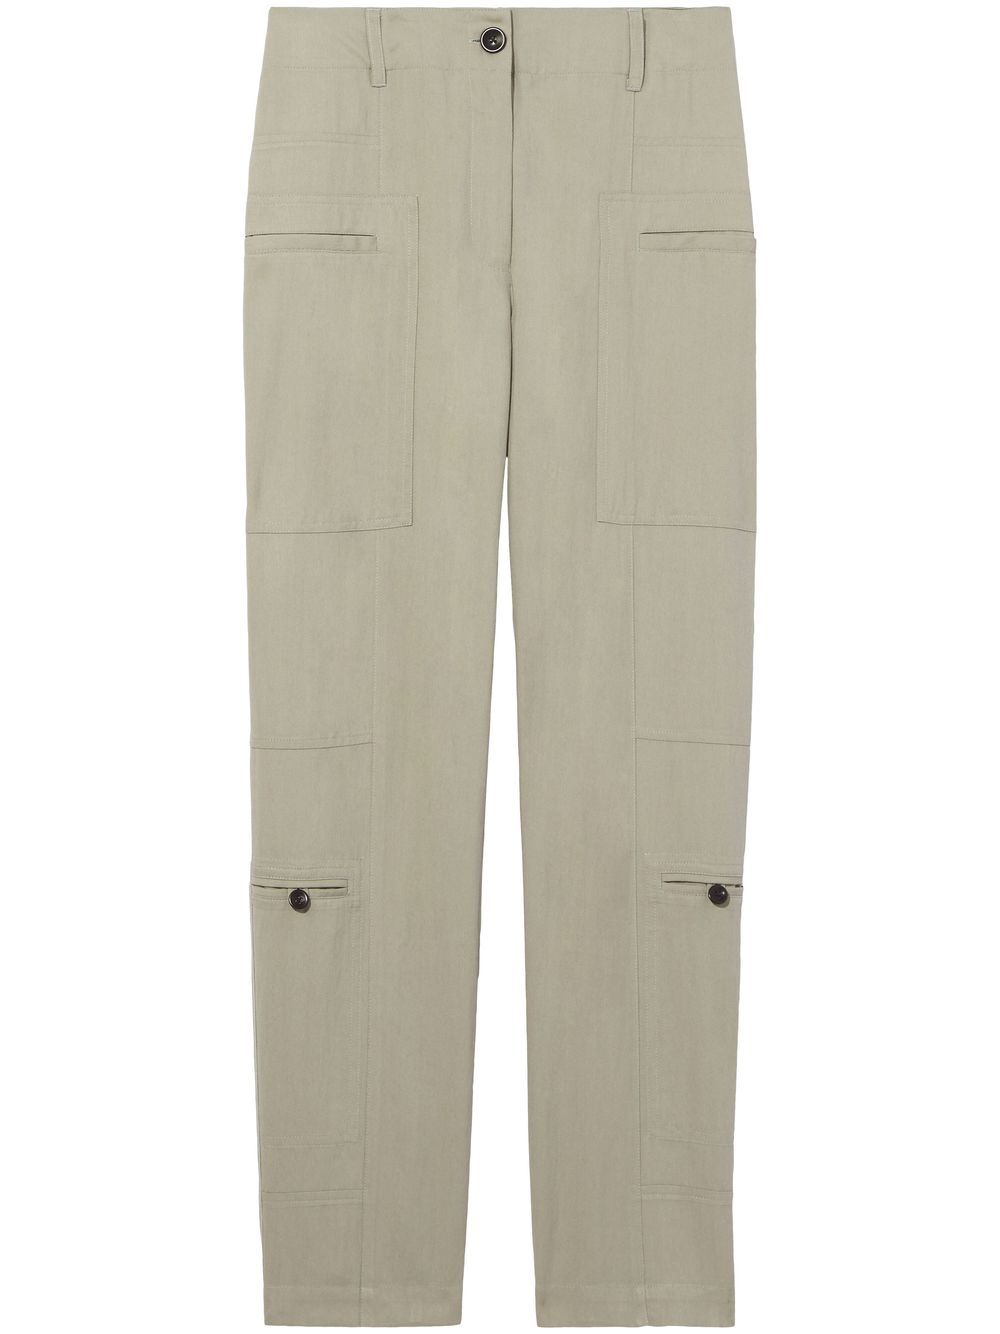 Proenza Schouler White Label tapered pocket-detail trousers - Grey von Proenza Schouler White Label